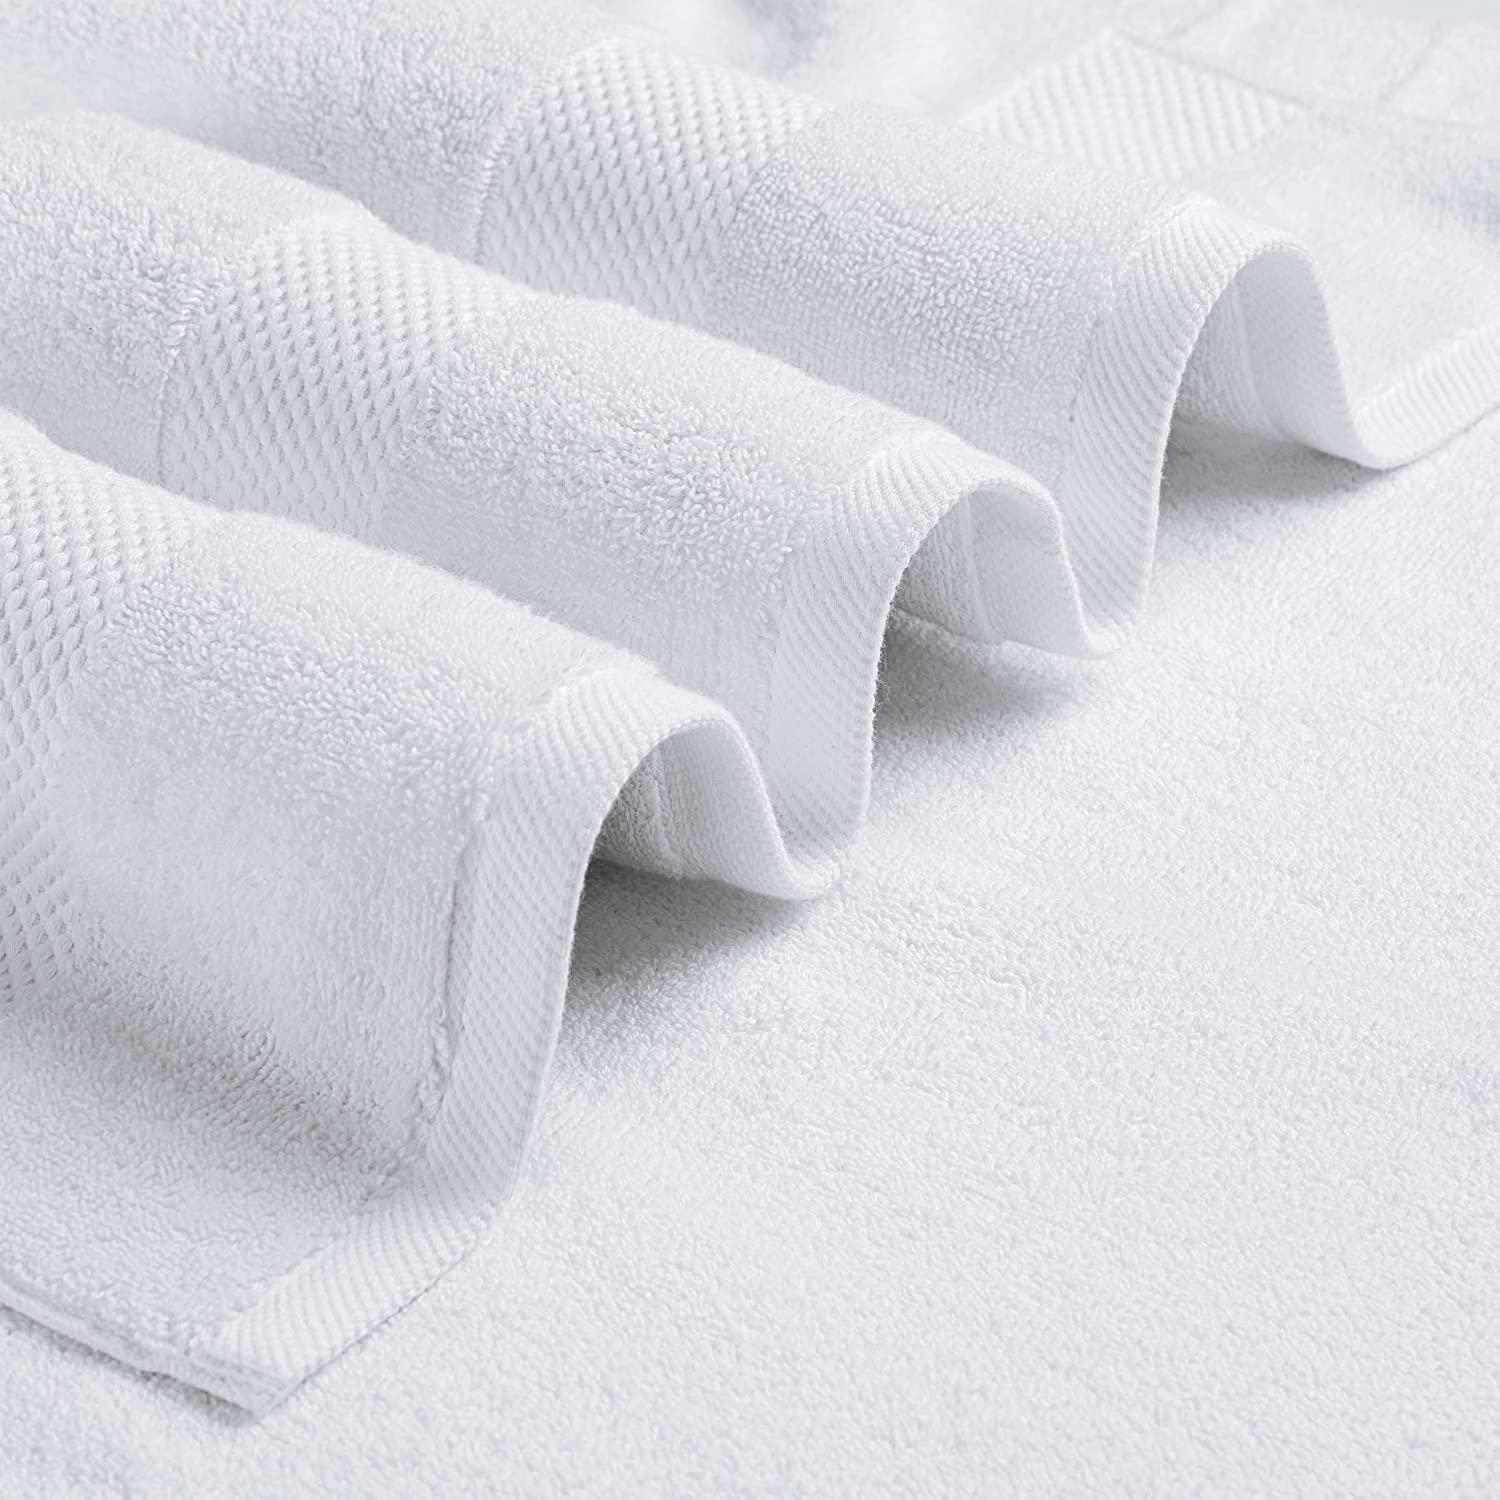 Luxury White Bath Towels Large - 100% Soft Cotton 700 GSM | Absorbent Hotel  Bathroom Towel | 27 inch X 54 inch | Set of 4 | Grey/White